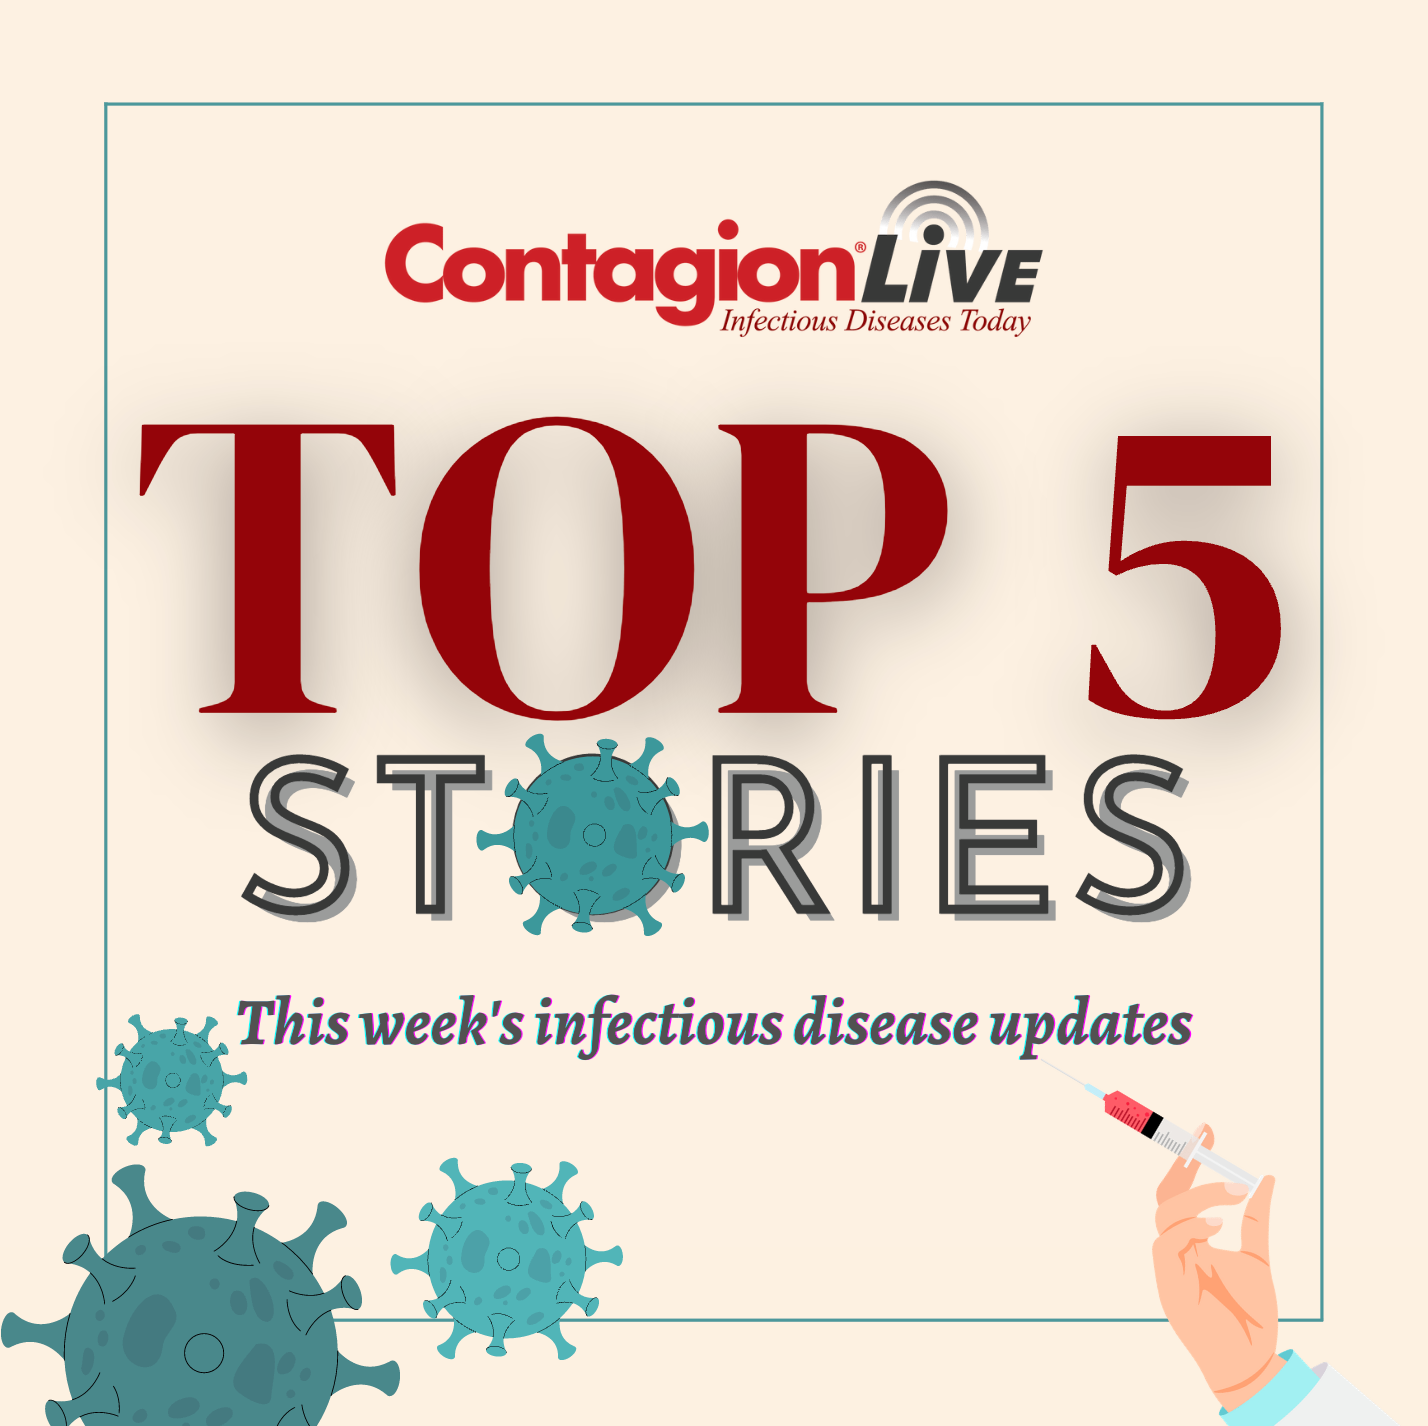 Infectious Disease Digest: This Week's Key Updates and Breakthroughs